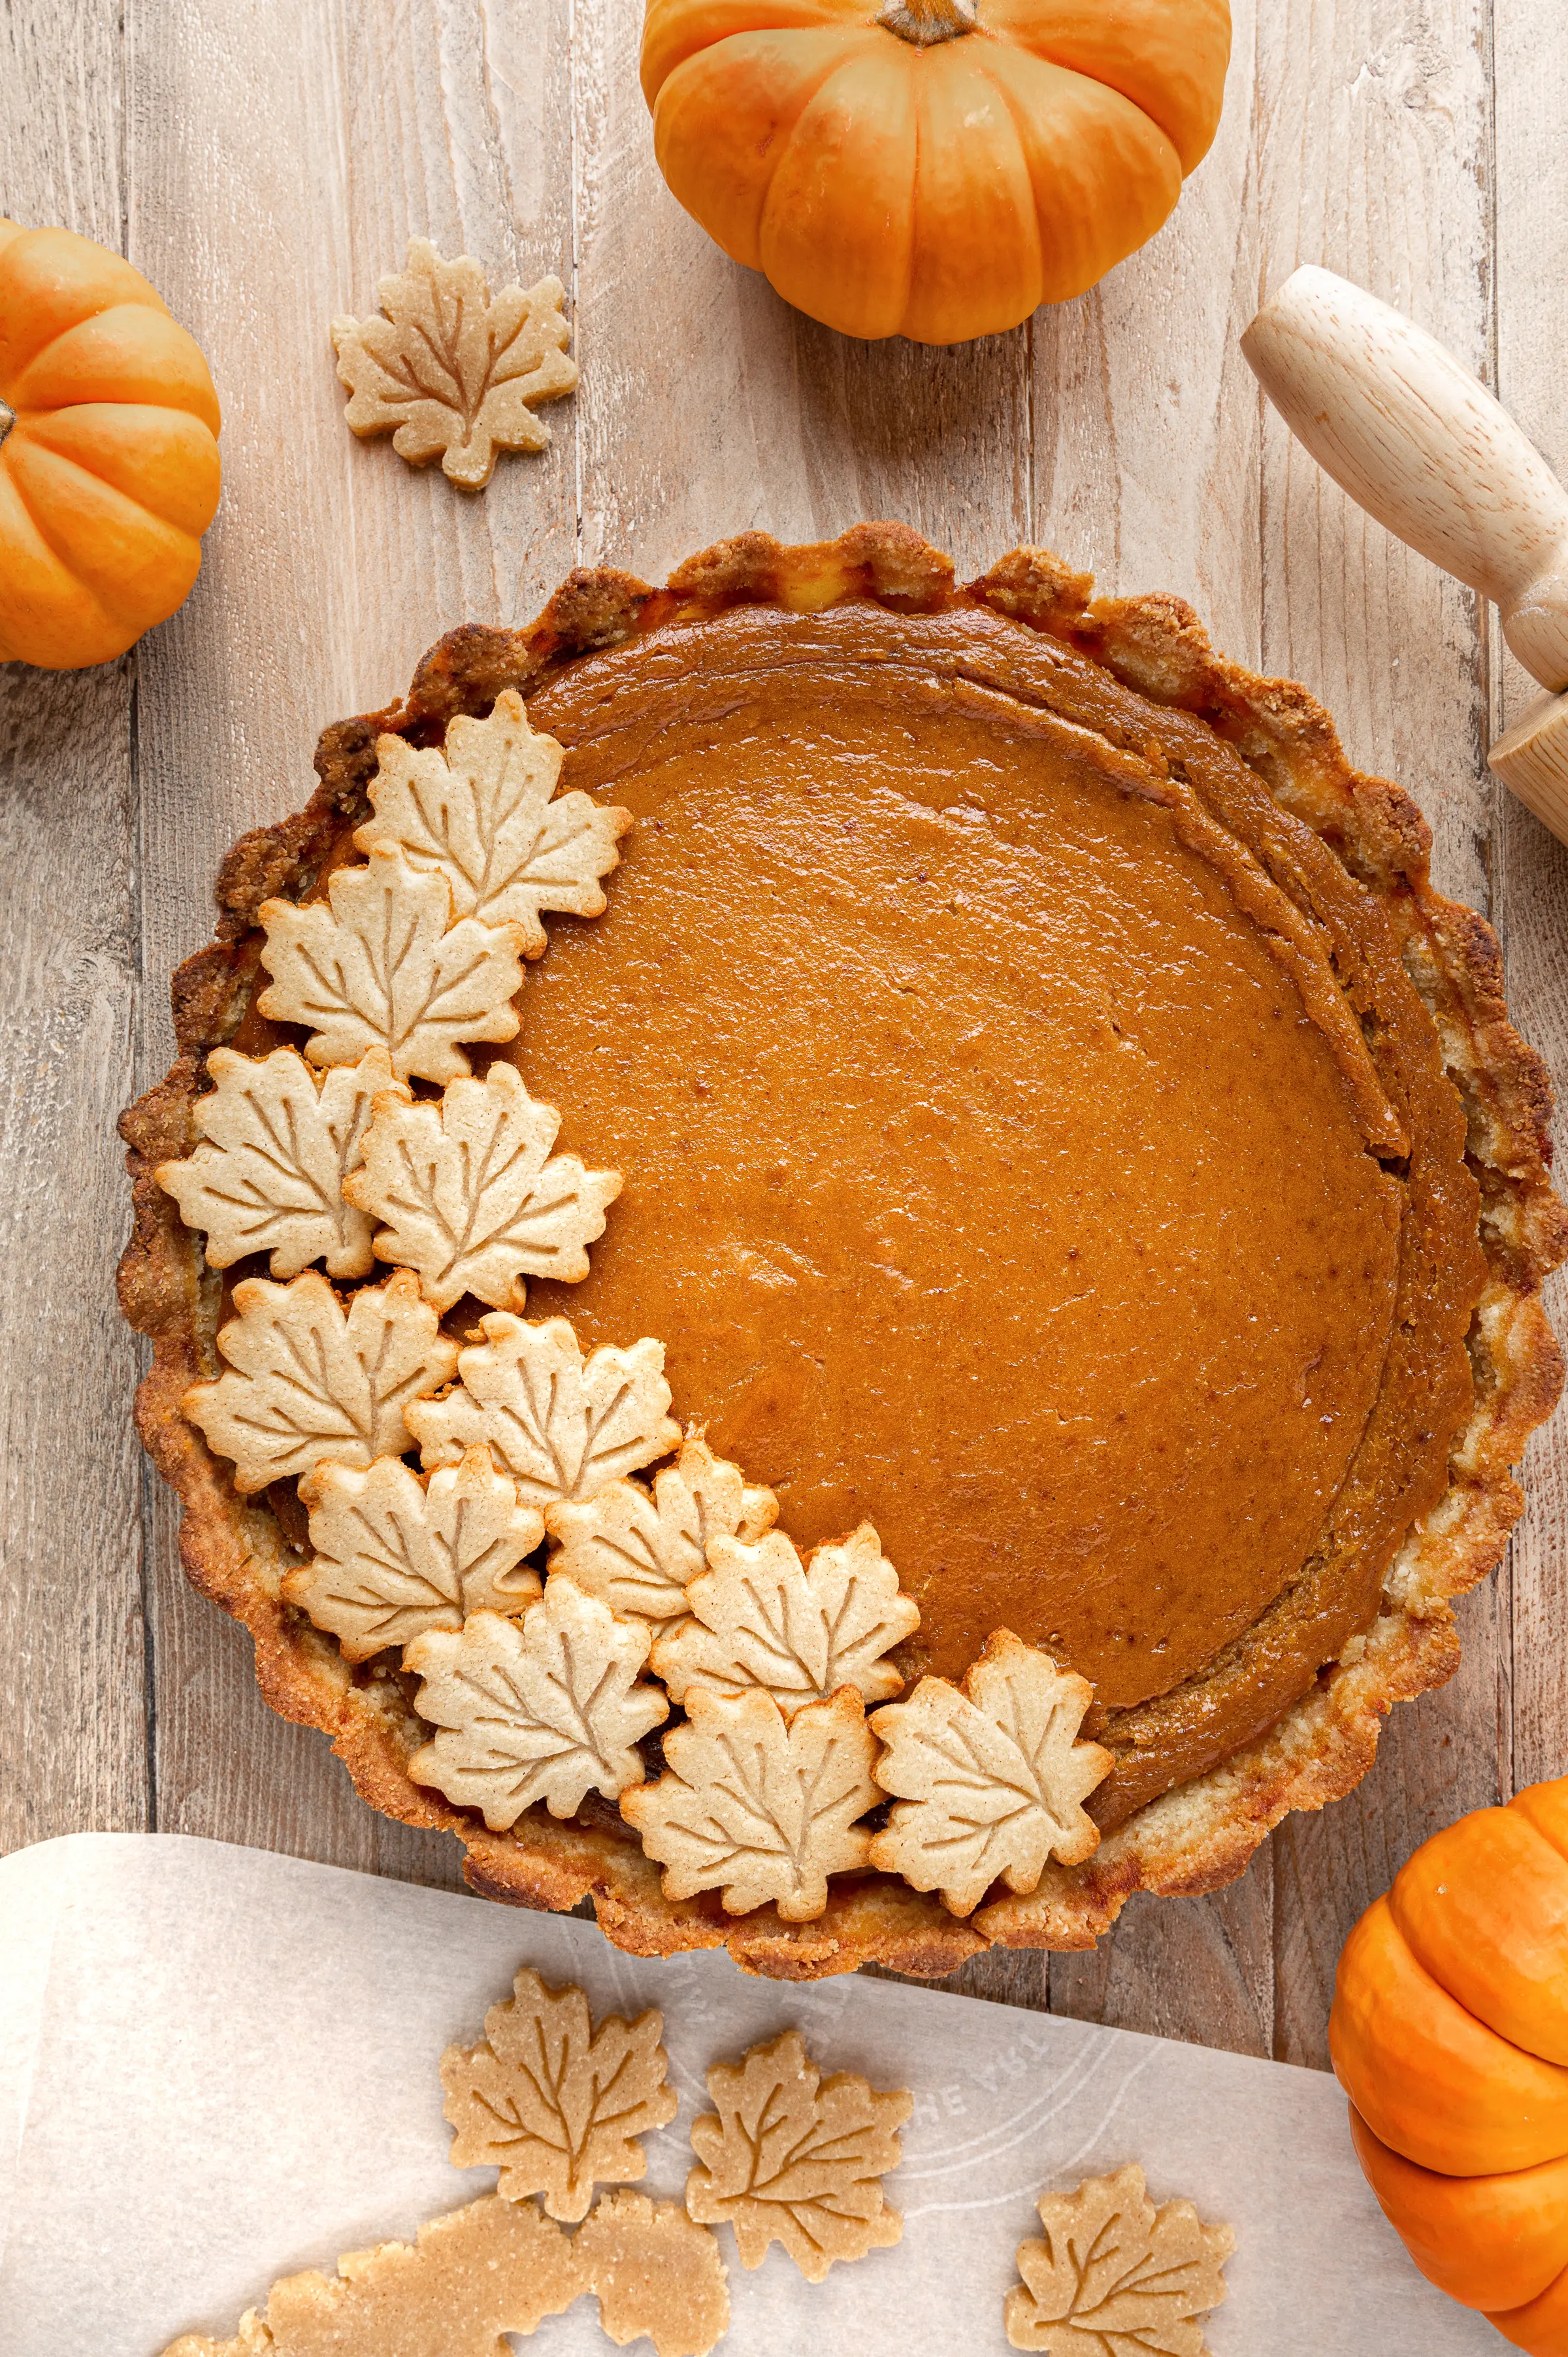 Pumpkin pie with maple shaped decorations on a rustic wooden background surrounded by mini orange pumpkins. 